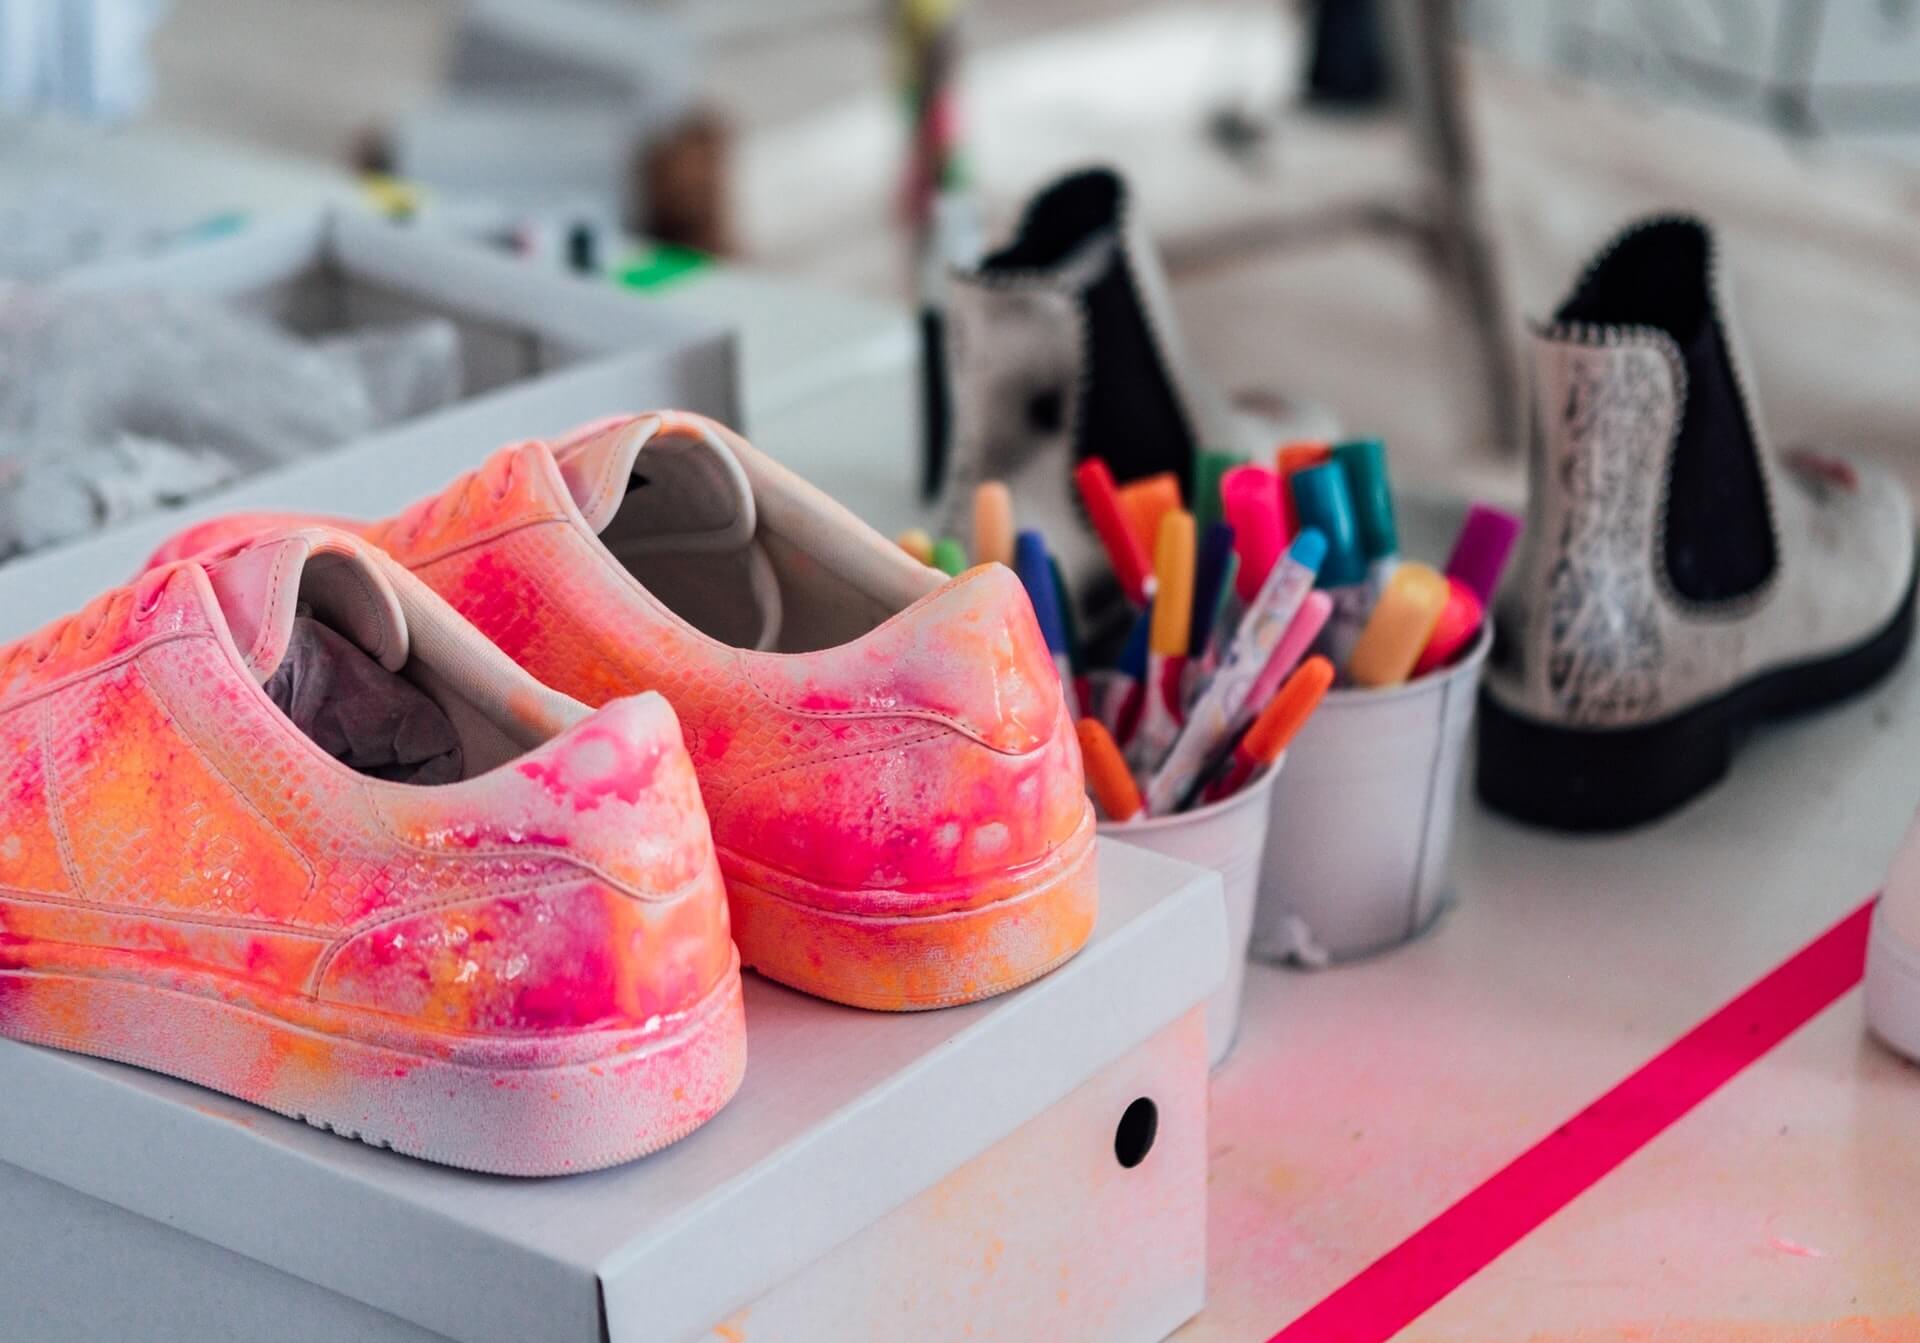 Want to make your old dirty shoes white again?!? Try spray paint